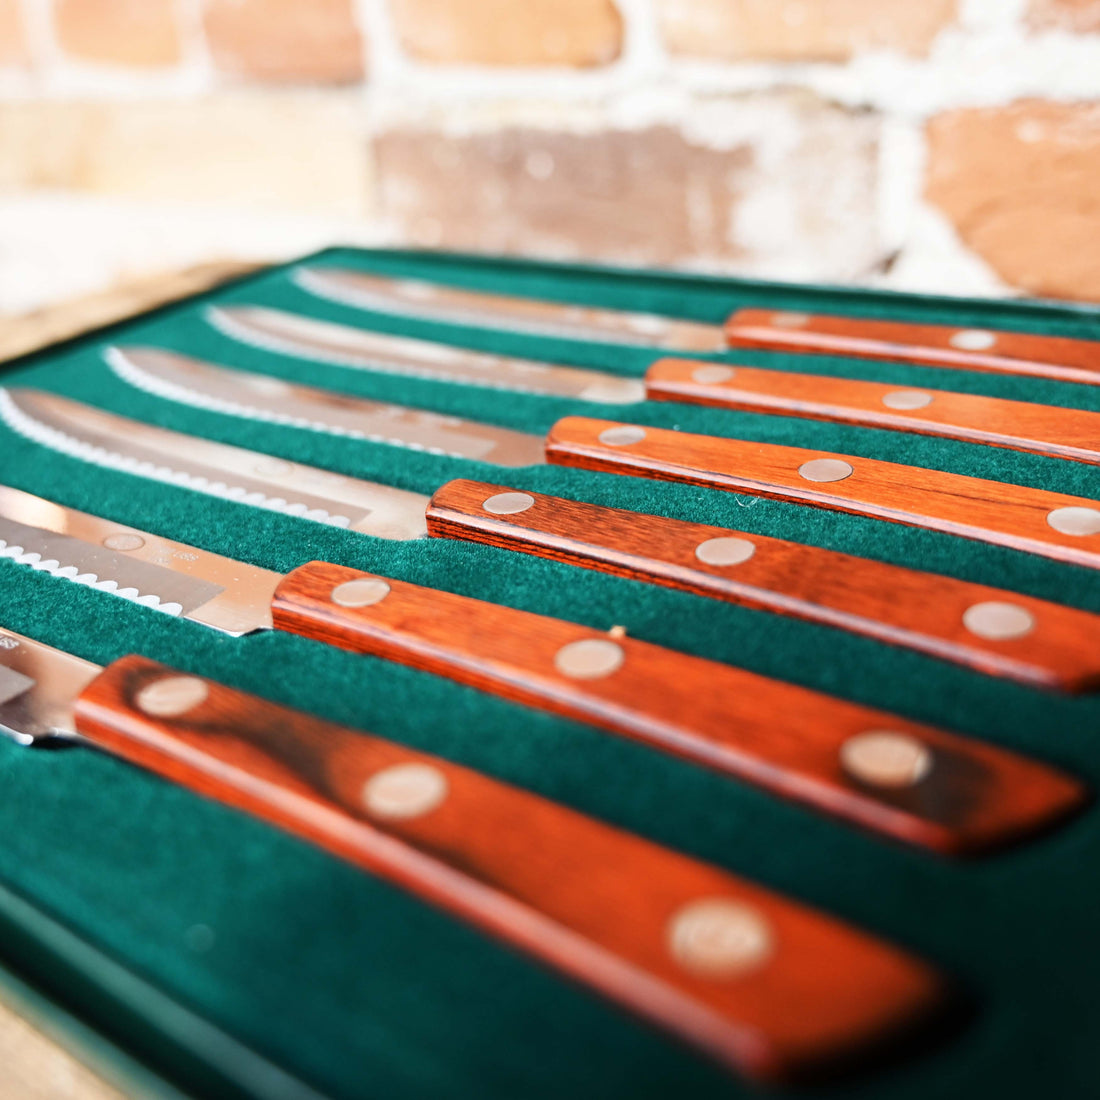 Rosewood Steak Knives view of knives